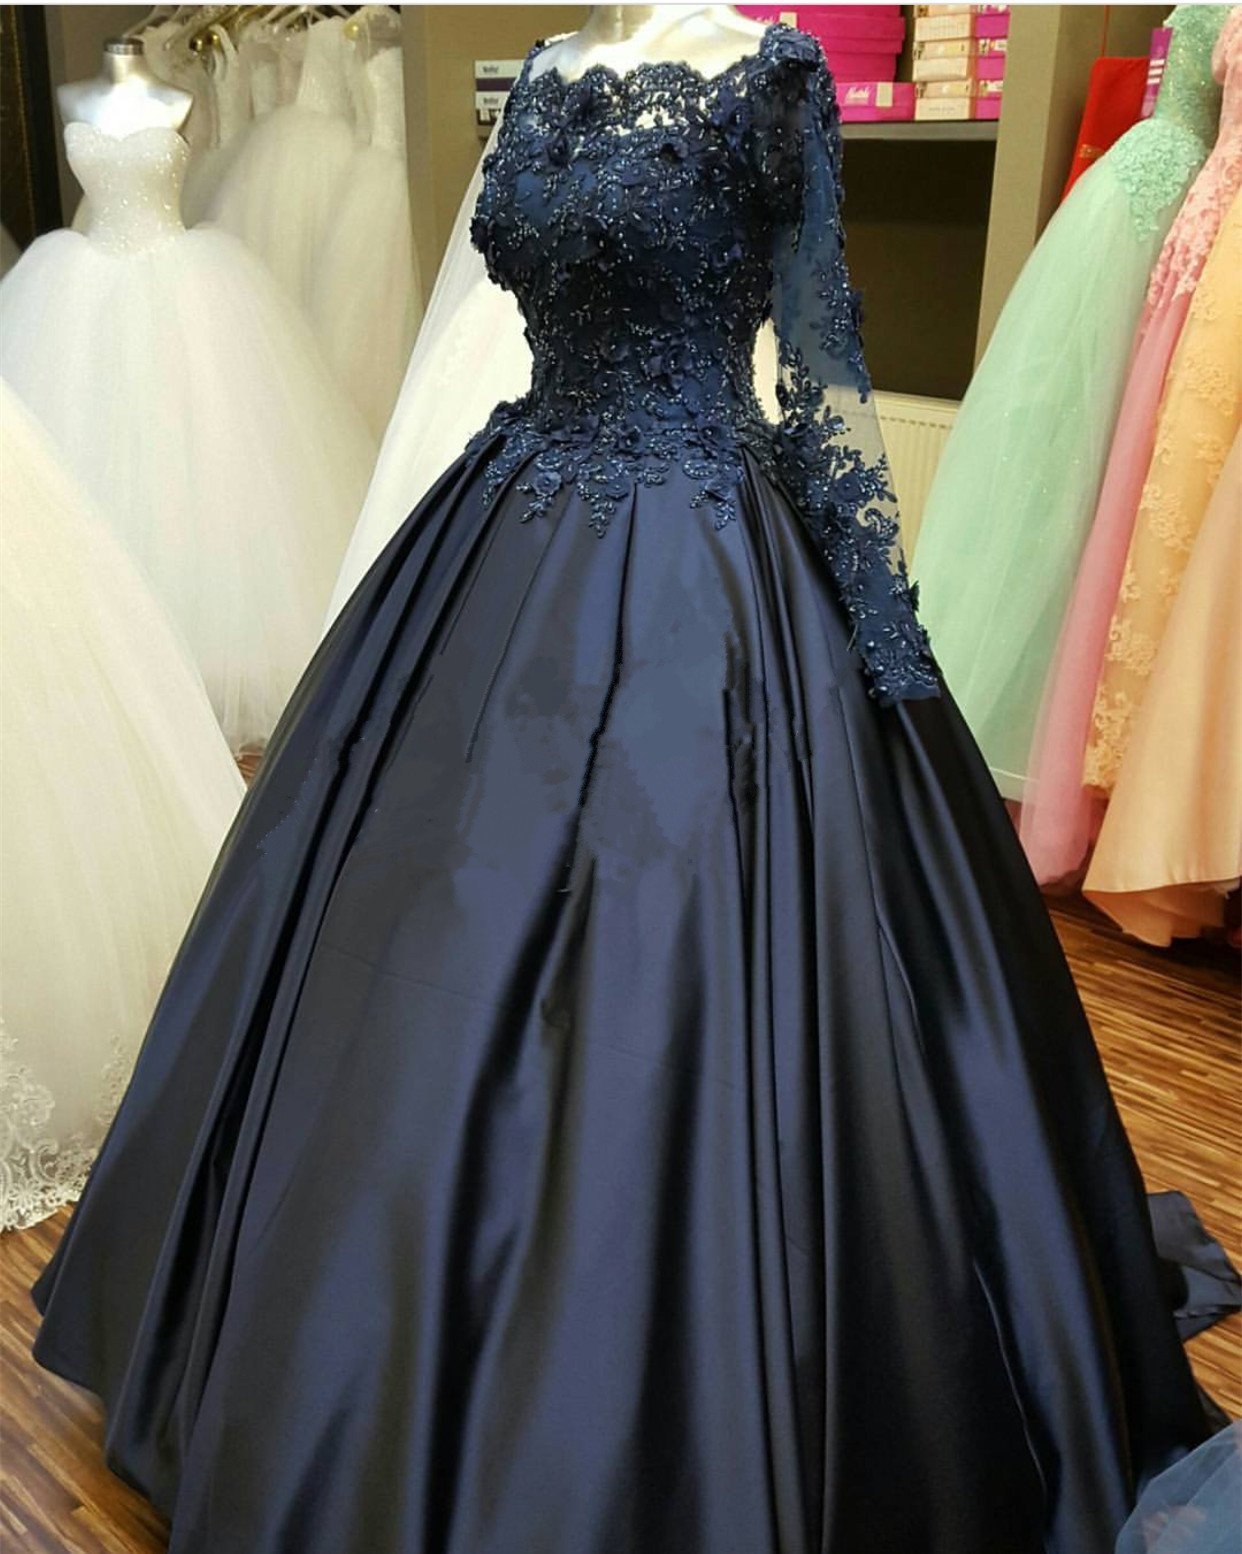 long sleeve navy evening gown